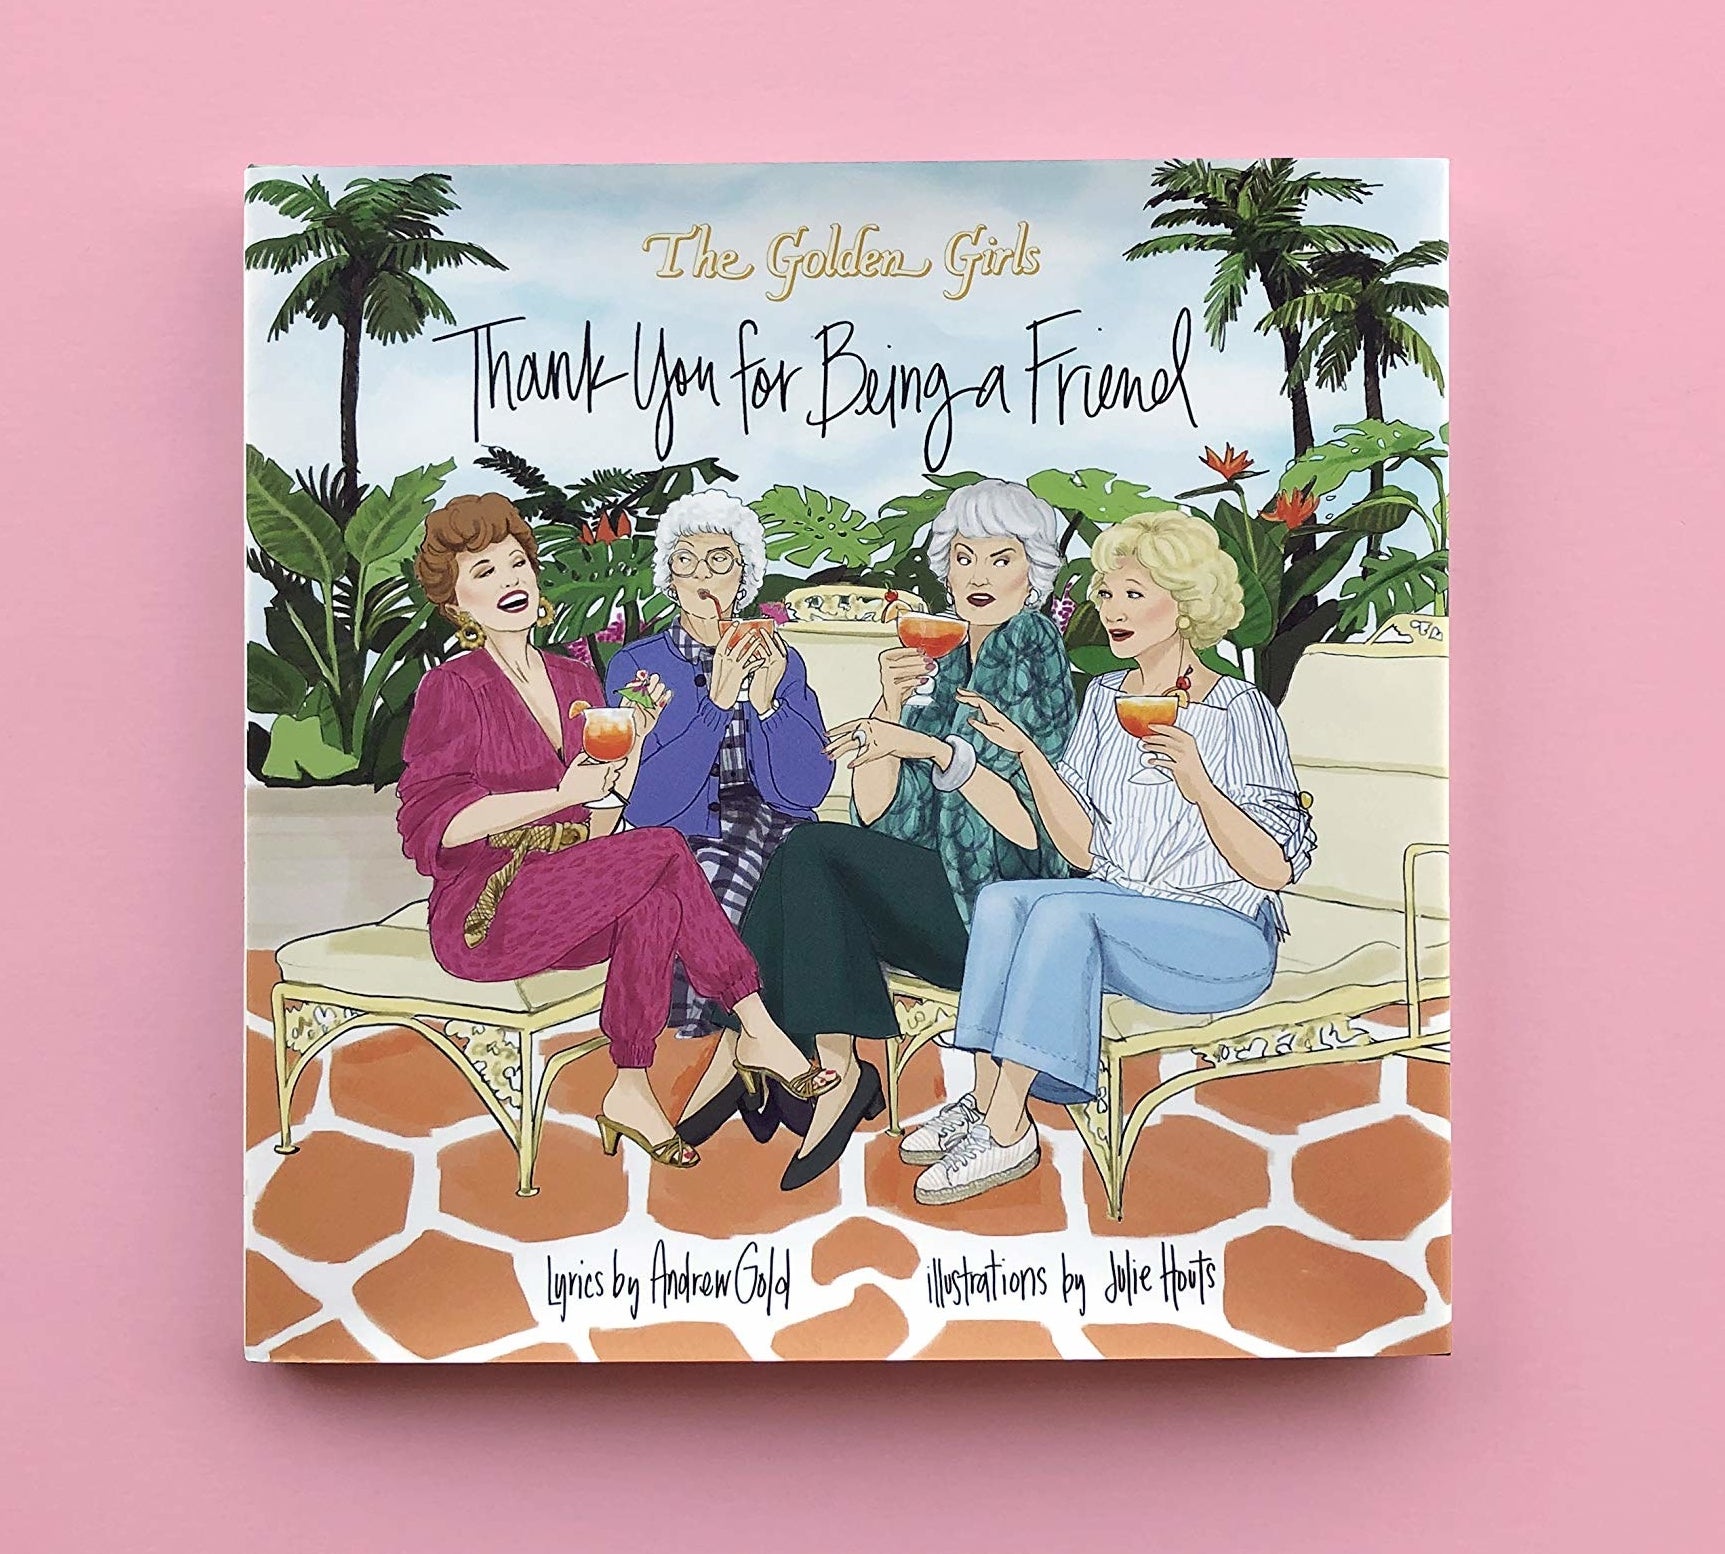 A Golden Girls picture book on a plain background